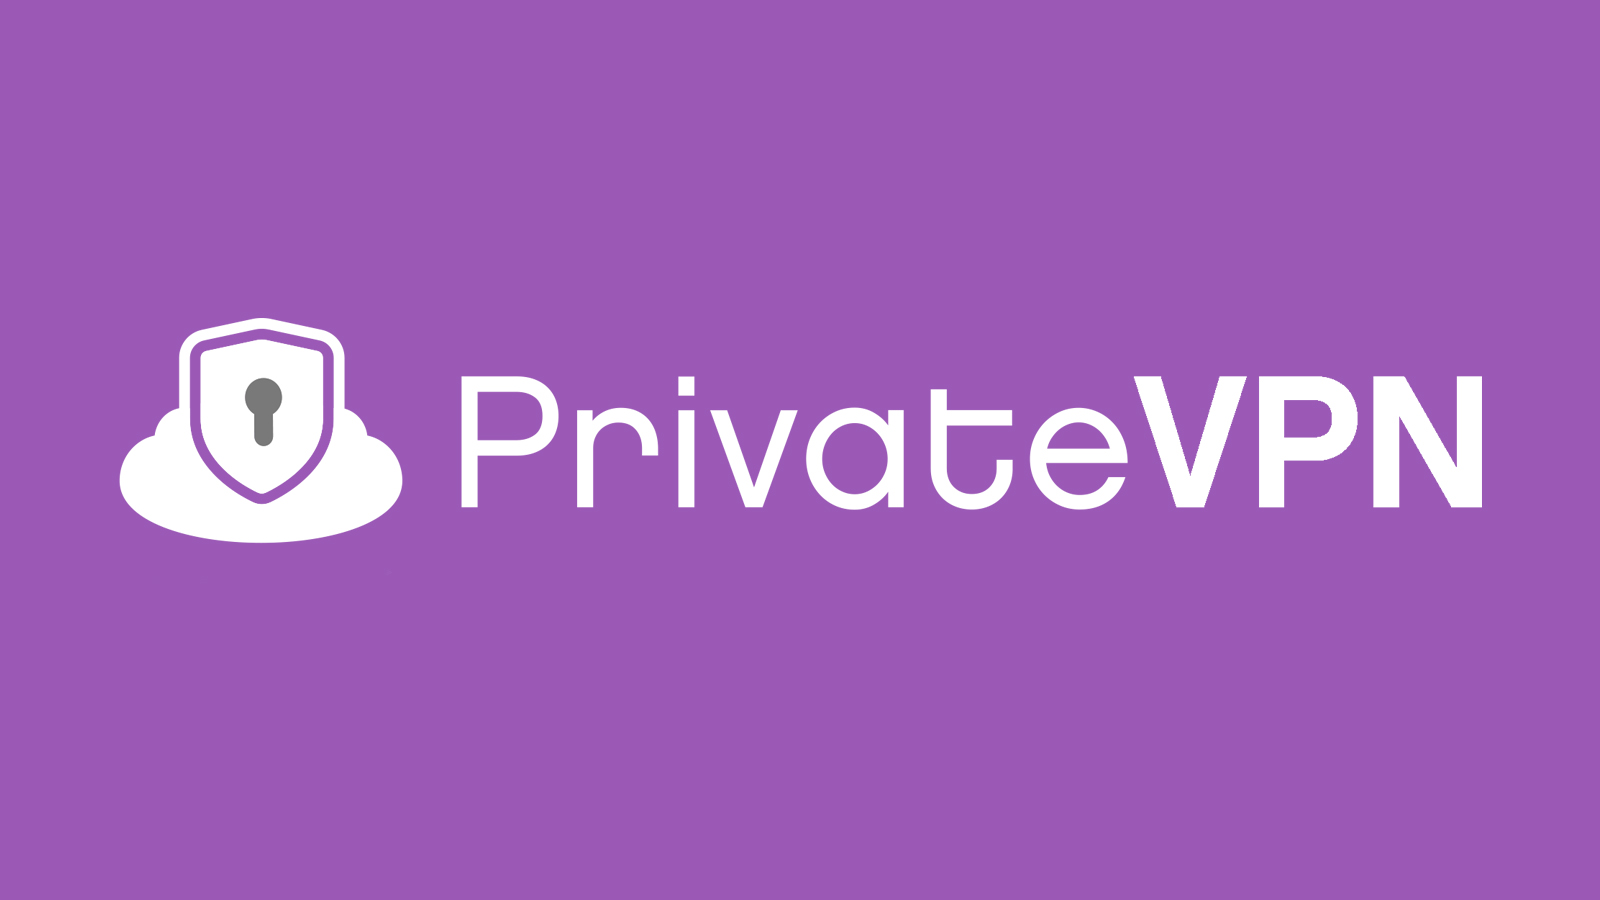 PrivateVPN Review: Comprehensive Analysis of Features, Pricing, Pros and Cons, and Alternatives